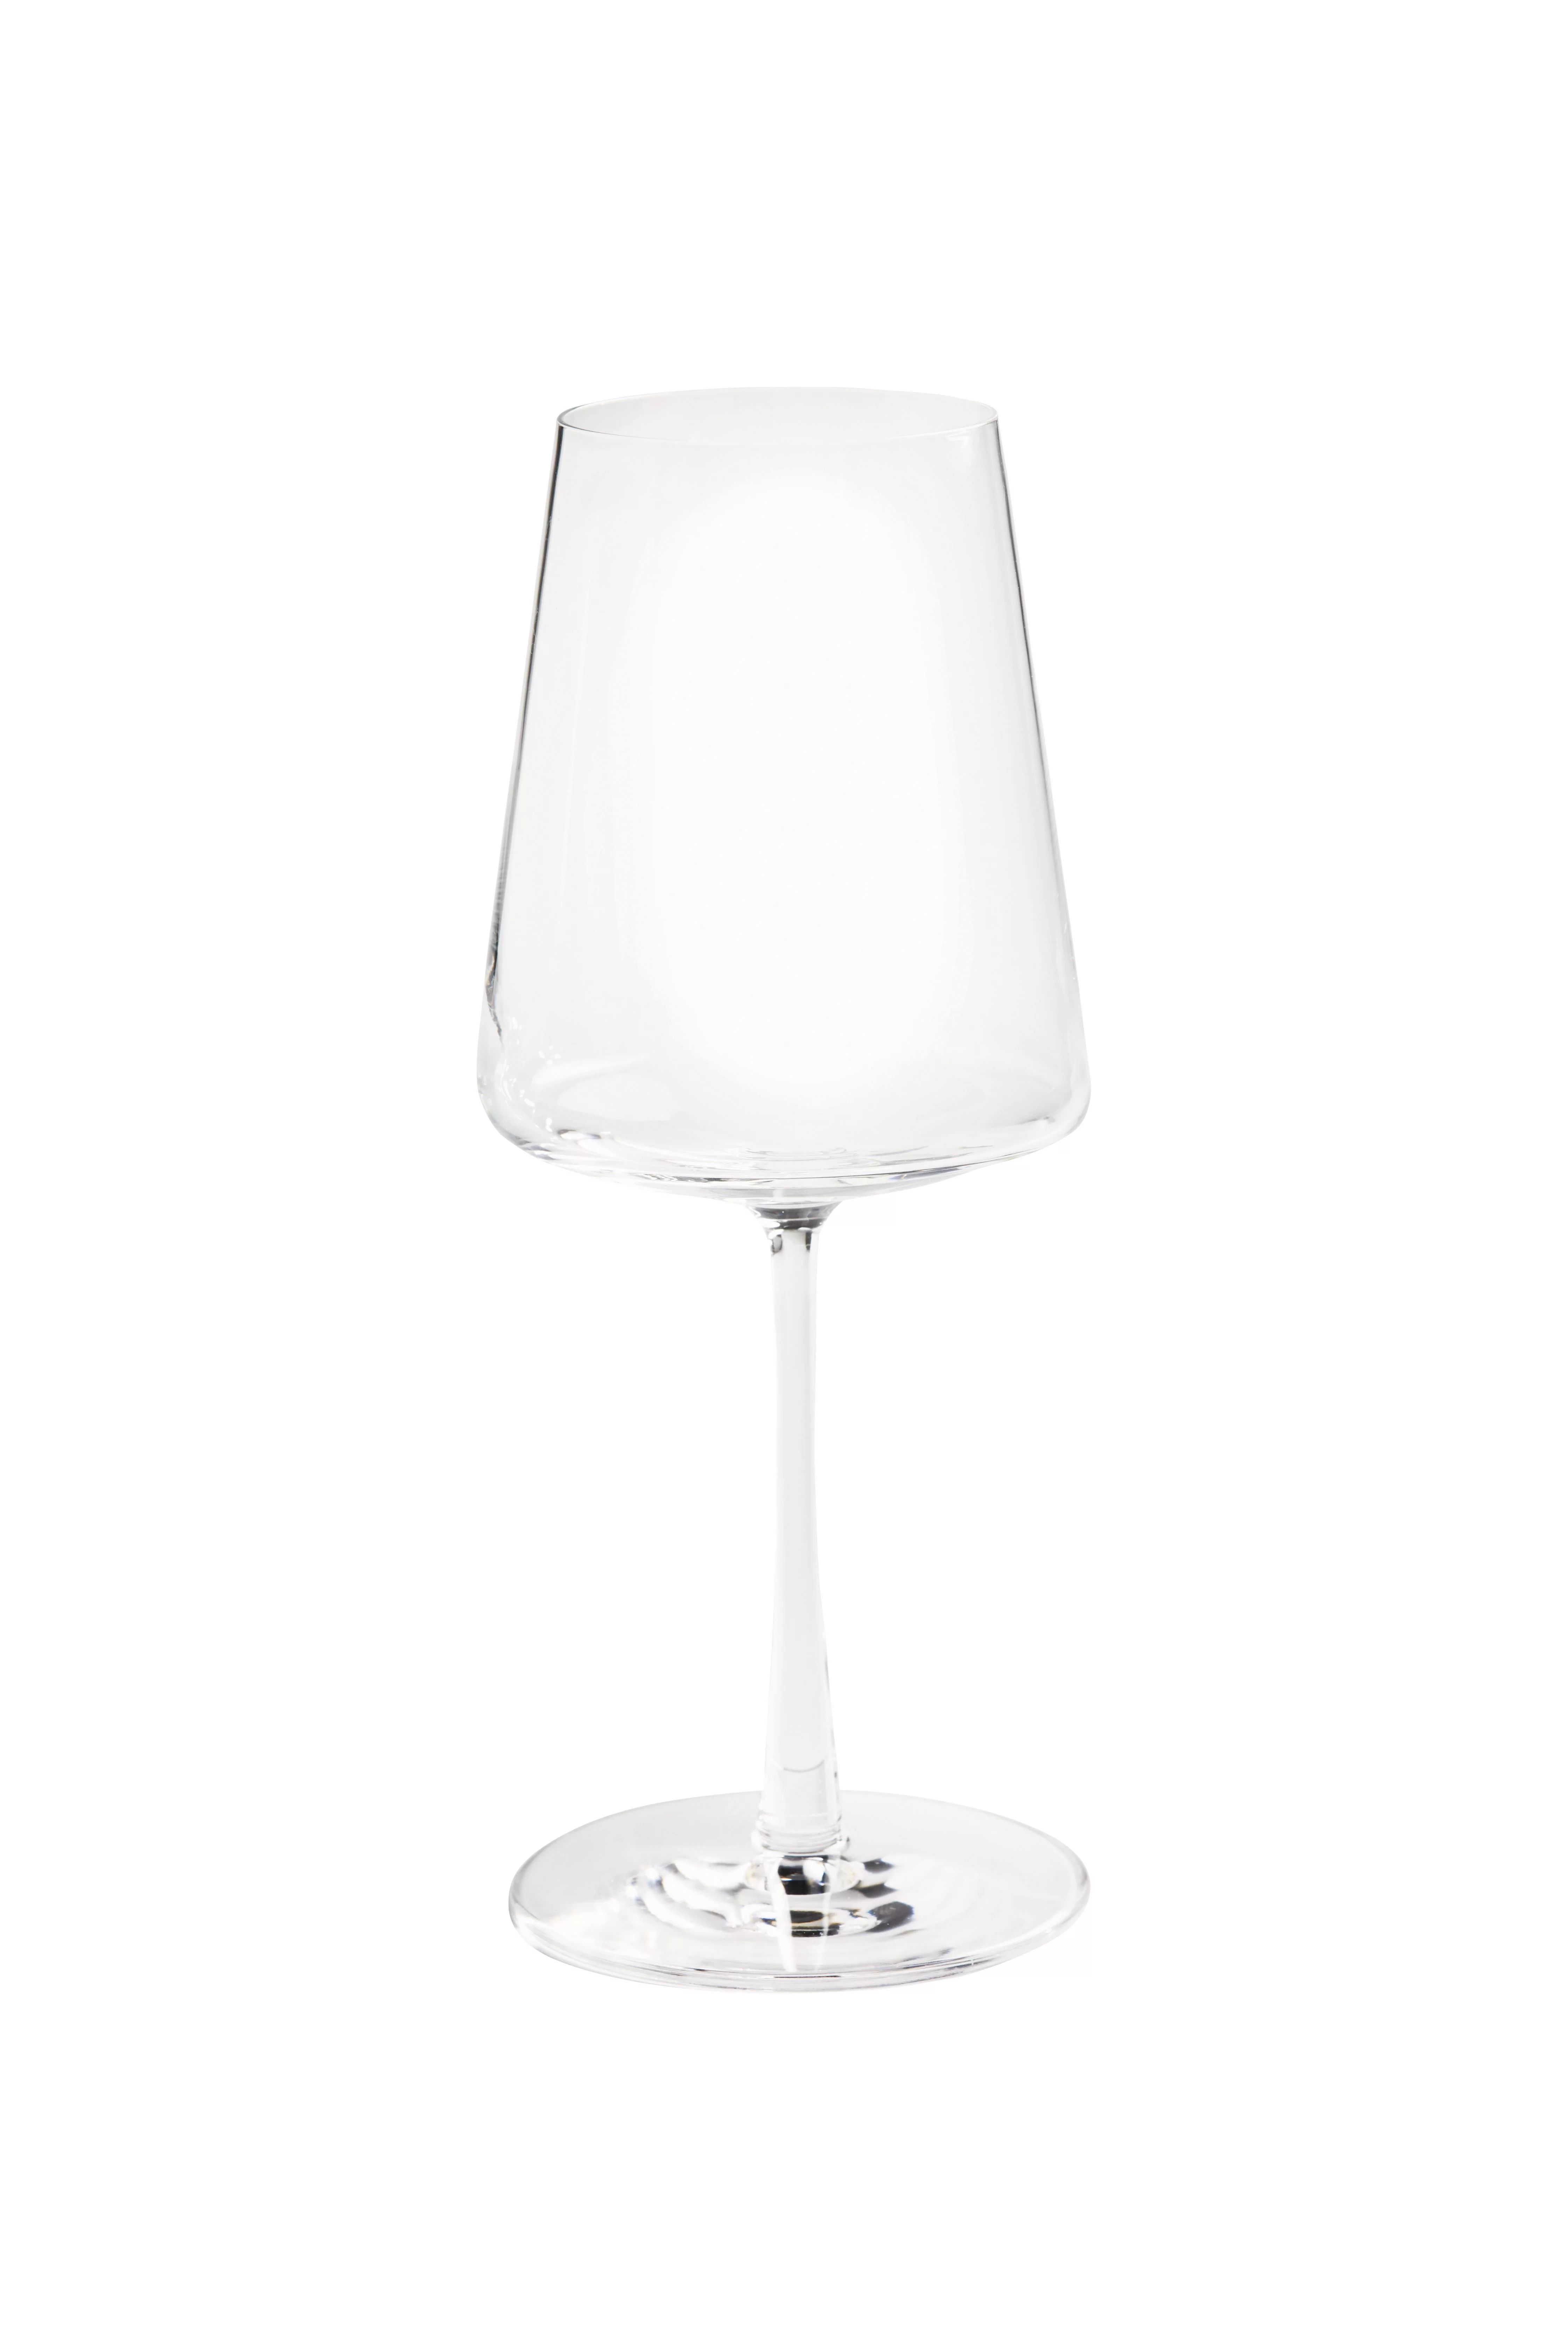 Better Homes & Gardens Clear Flared White Wine Glass with Stem, 4 Pack | Walmart (US)